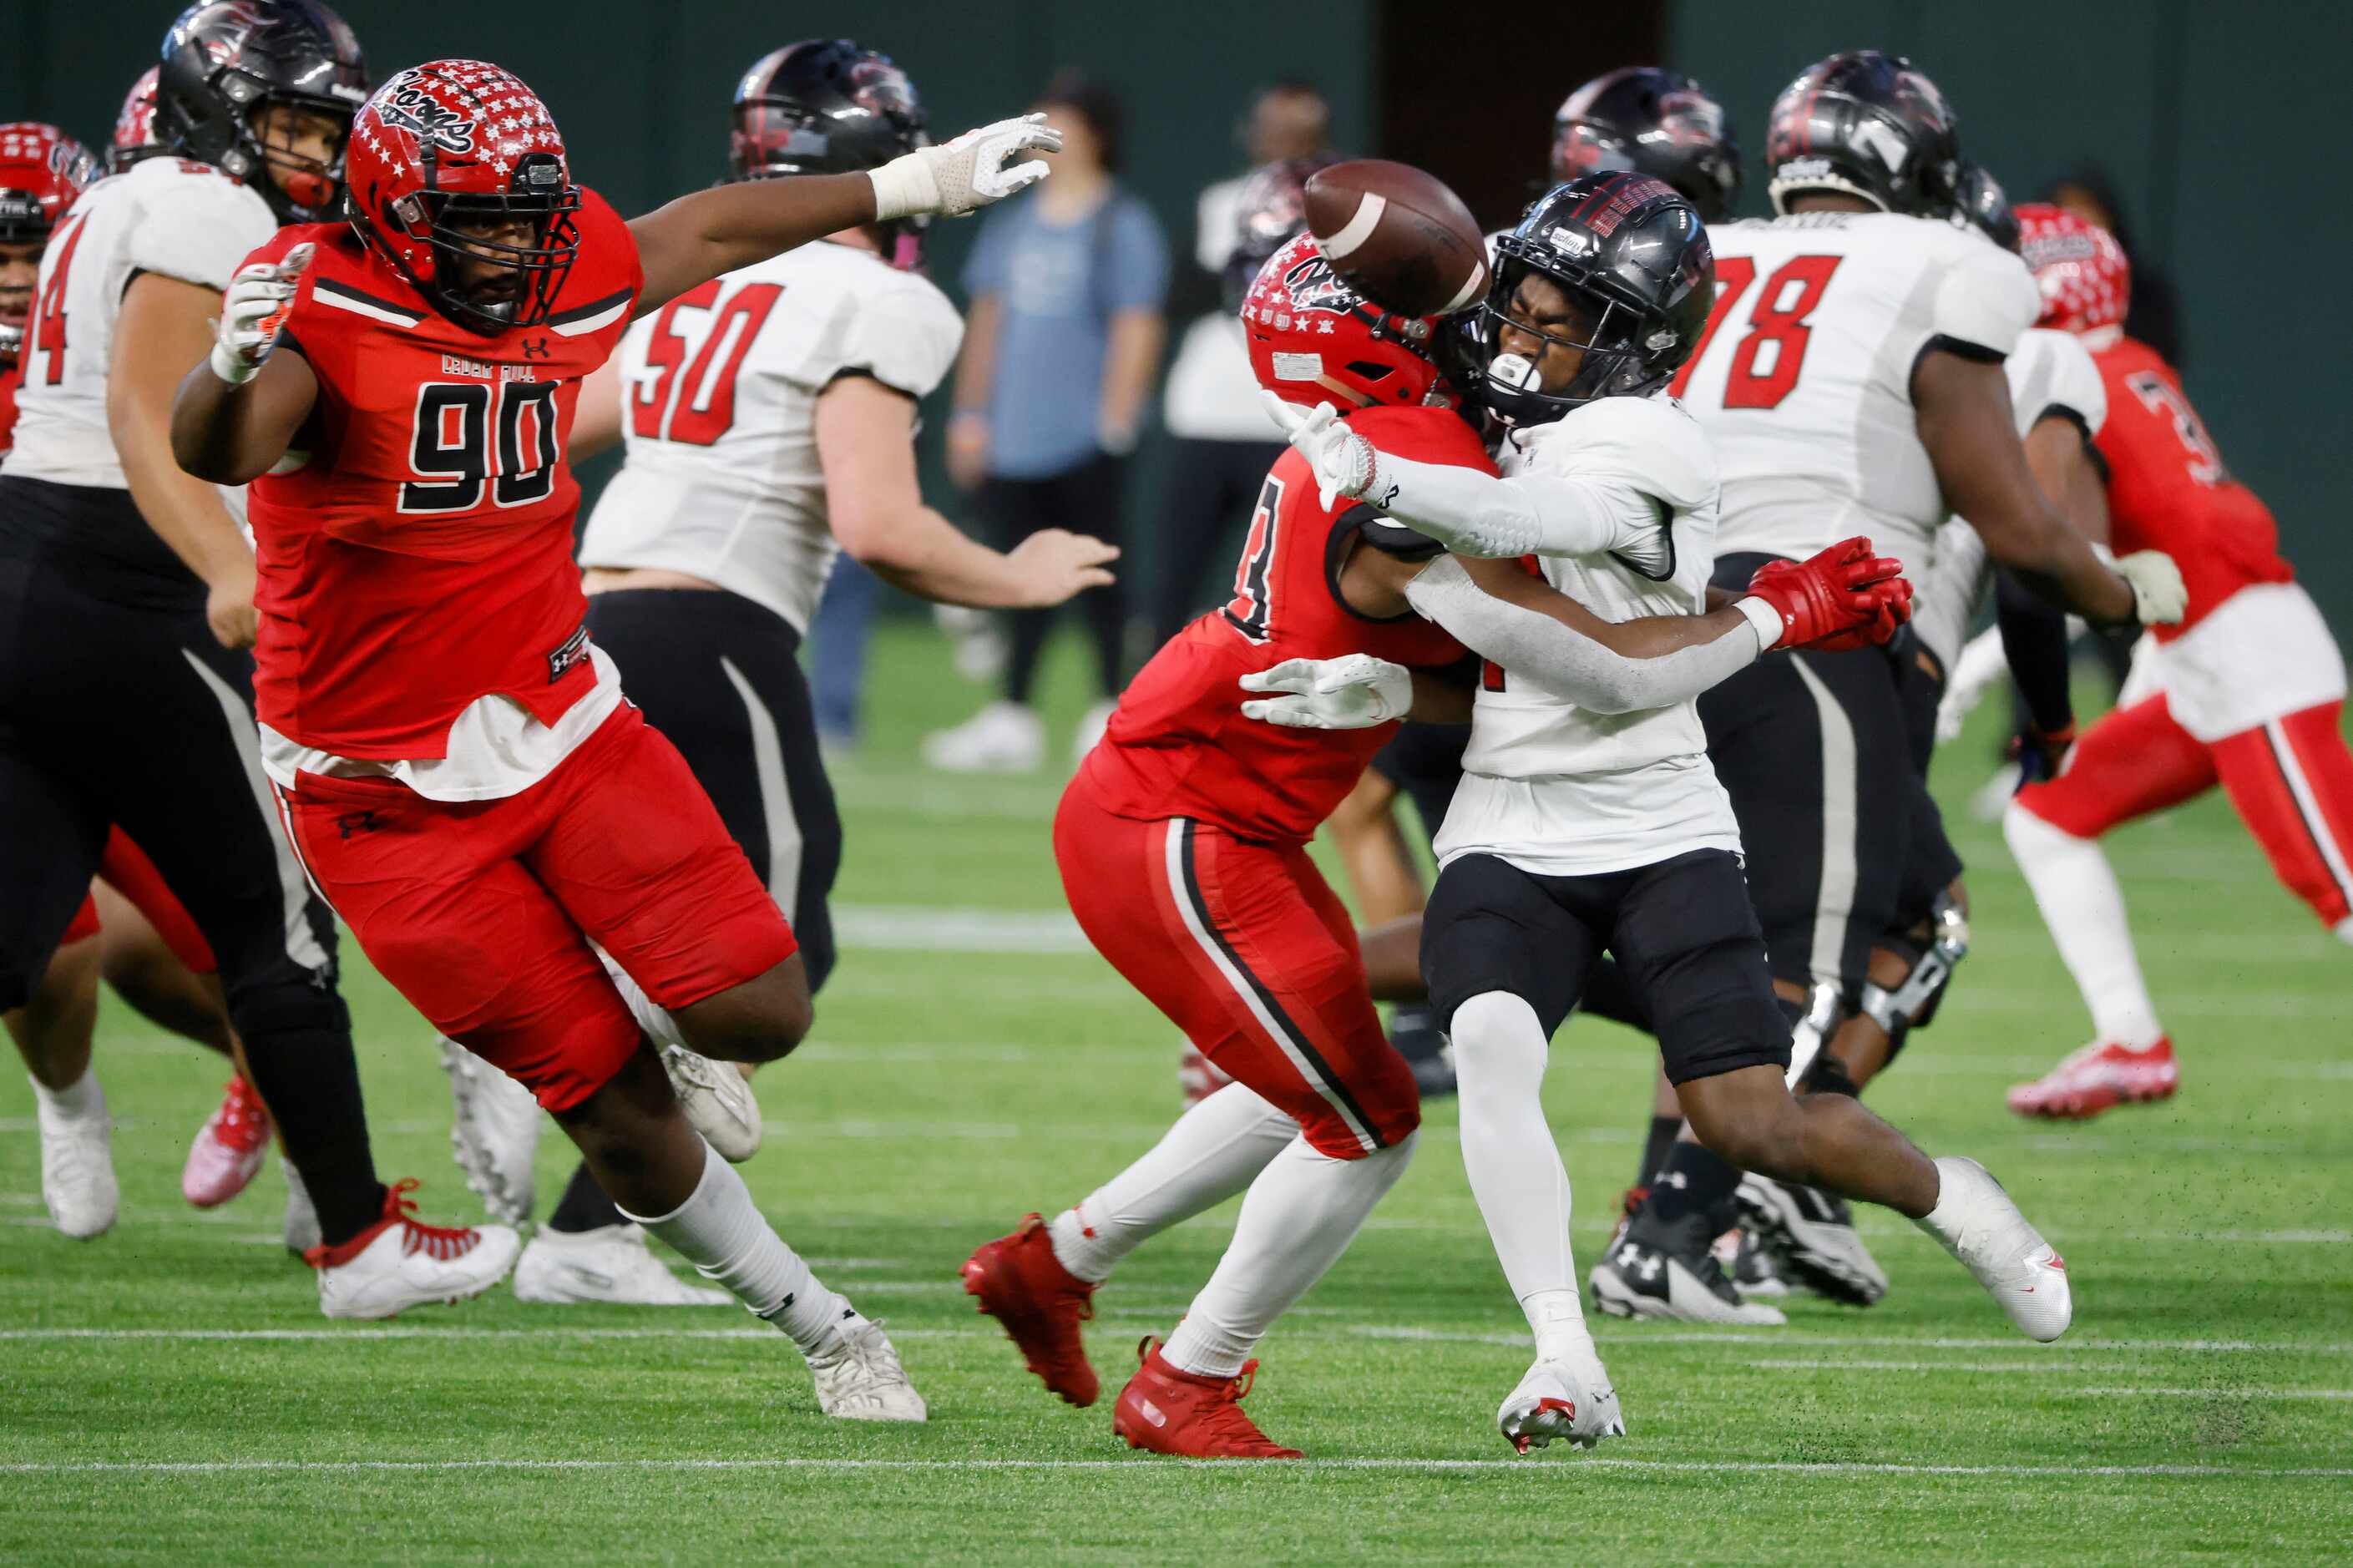 Cedar Hill defenders Syncere Massey (90) and Traviun Smith (33) defend a shovel pass by...